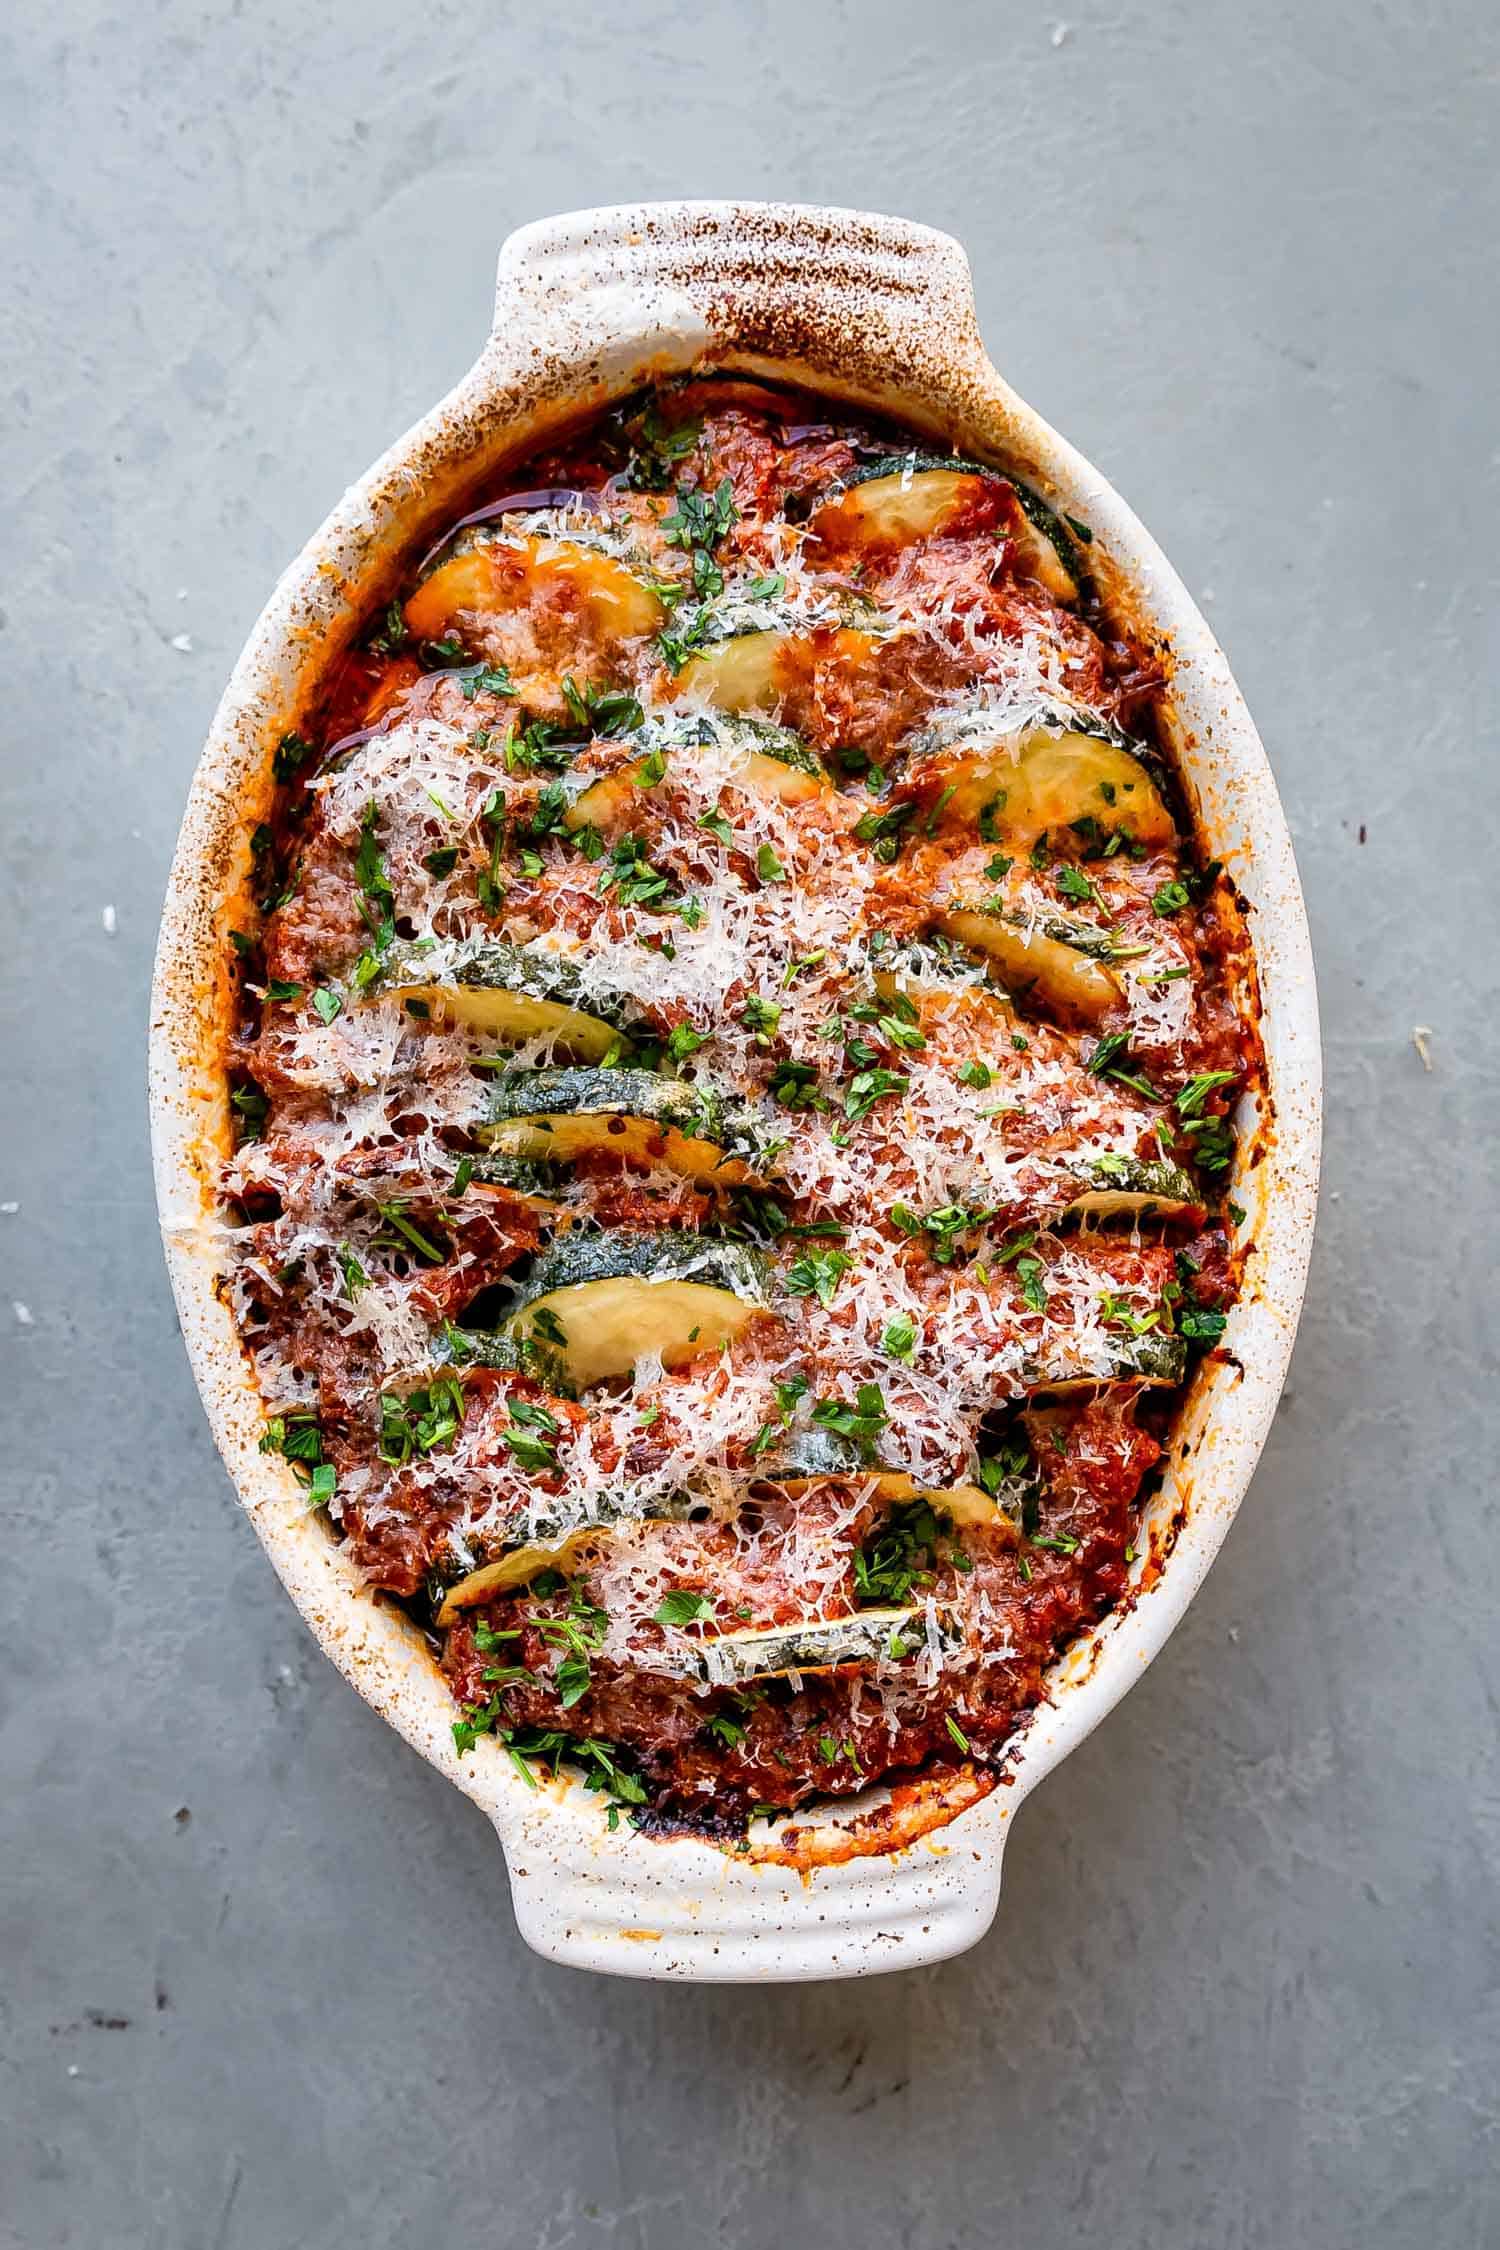 low carb zucchini casserole with red sauce and parmesan cheese on top